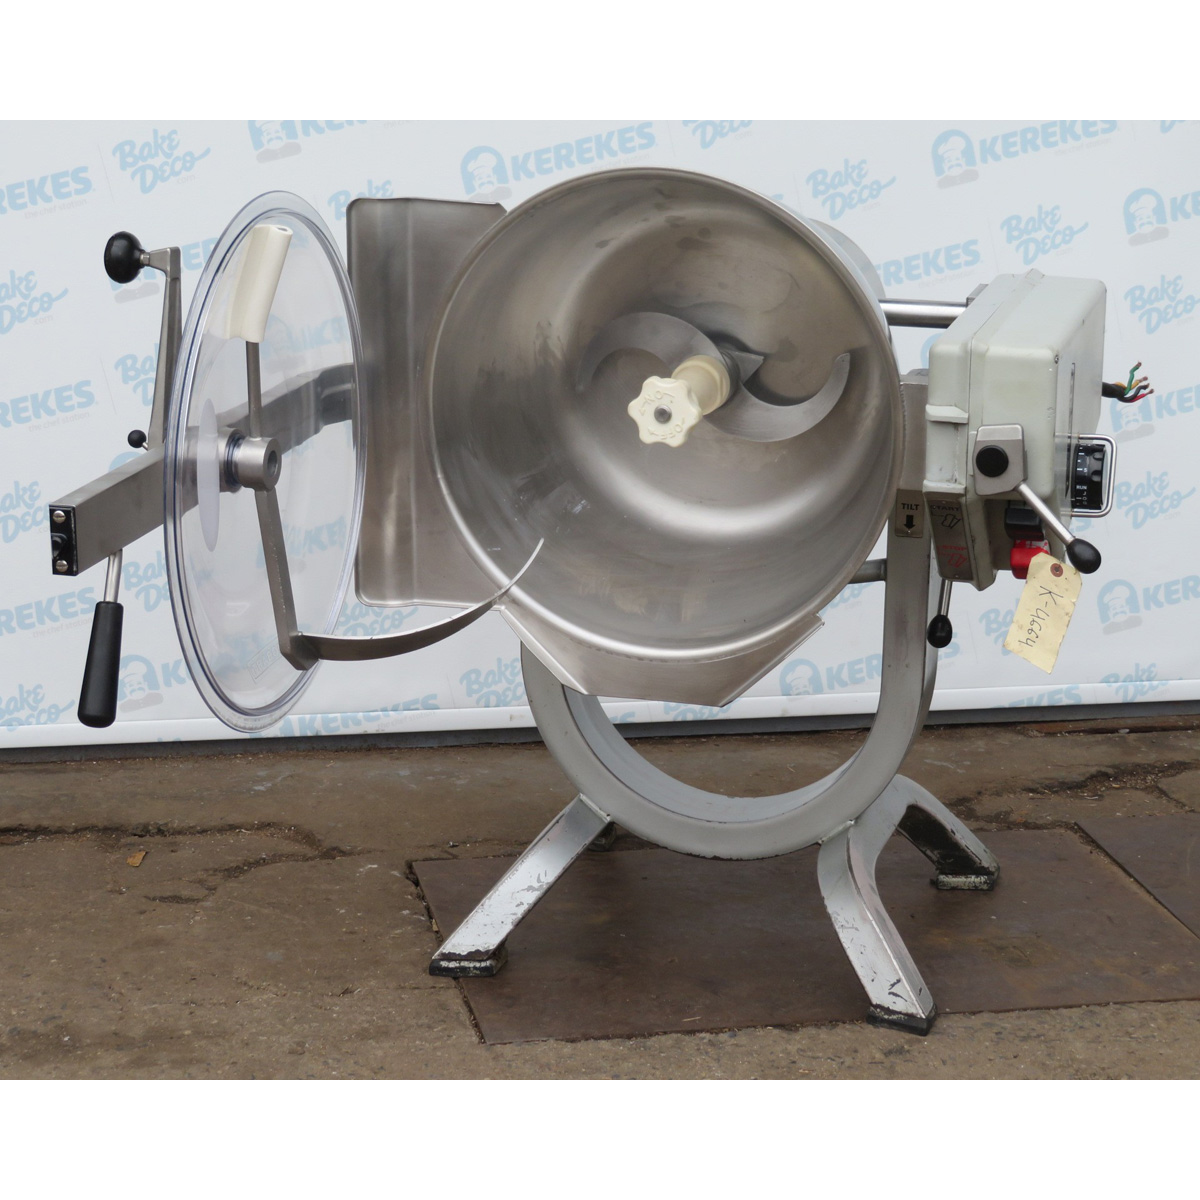 Hobart HCM-450 45 Quart Vertical Cutter Mixer, Used Great Condition image 1